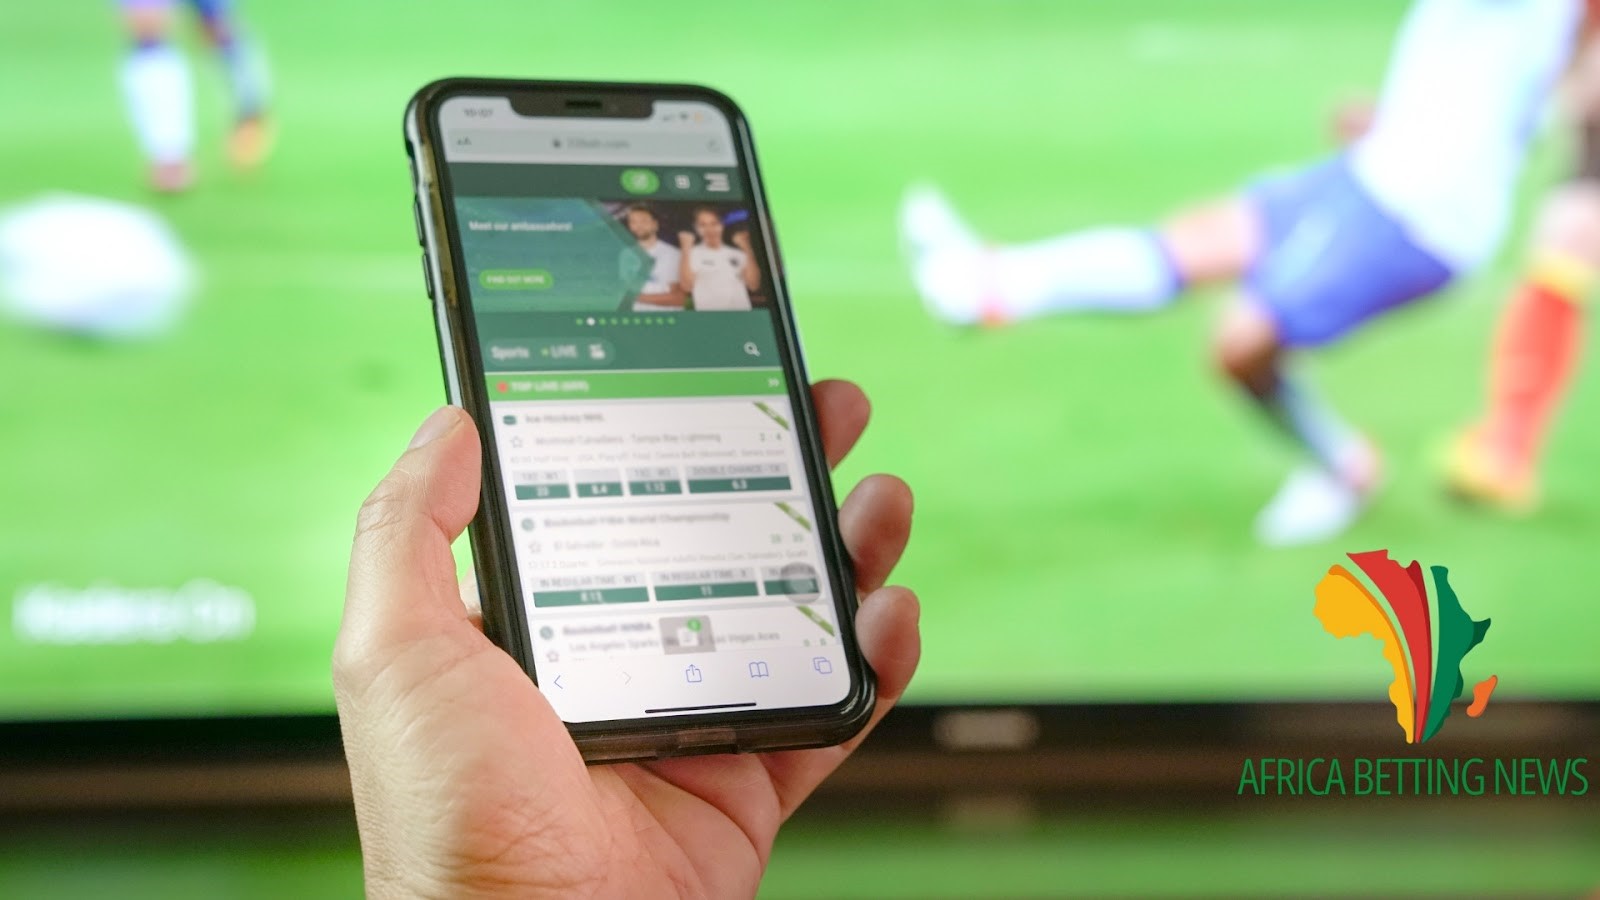 A person holding a smartphone with a betting app open on the screen. In the background, a blurred image of a soccer match is visible on a TV screen. The Africa Betting News logo is displayed in the lower right corner of the image.